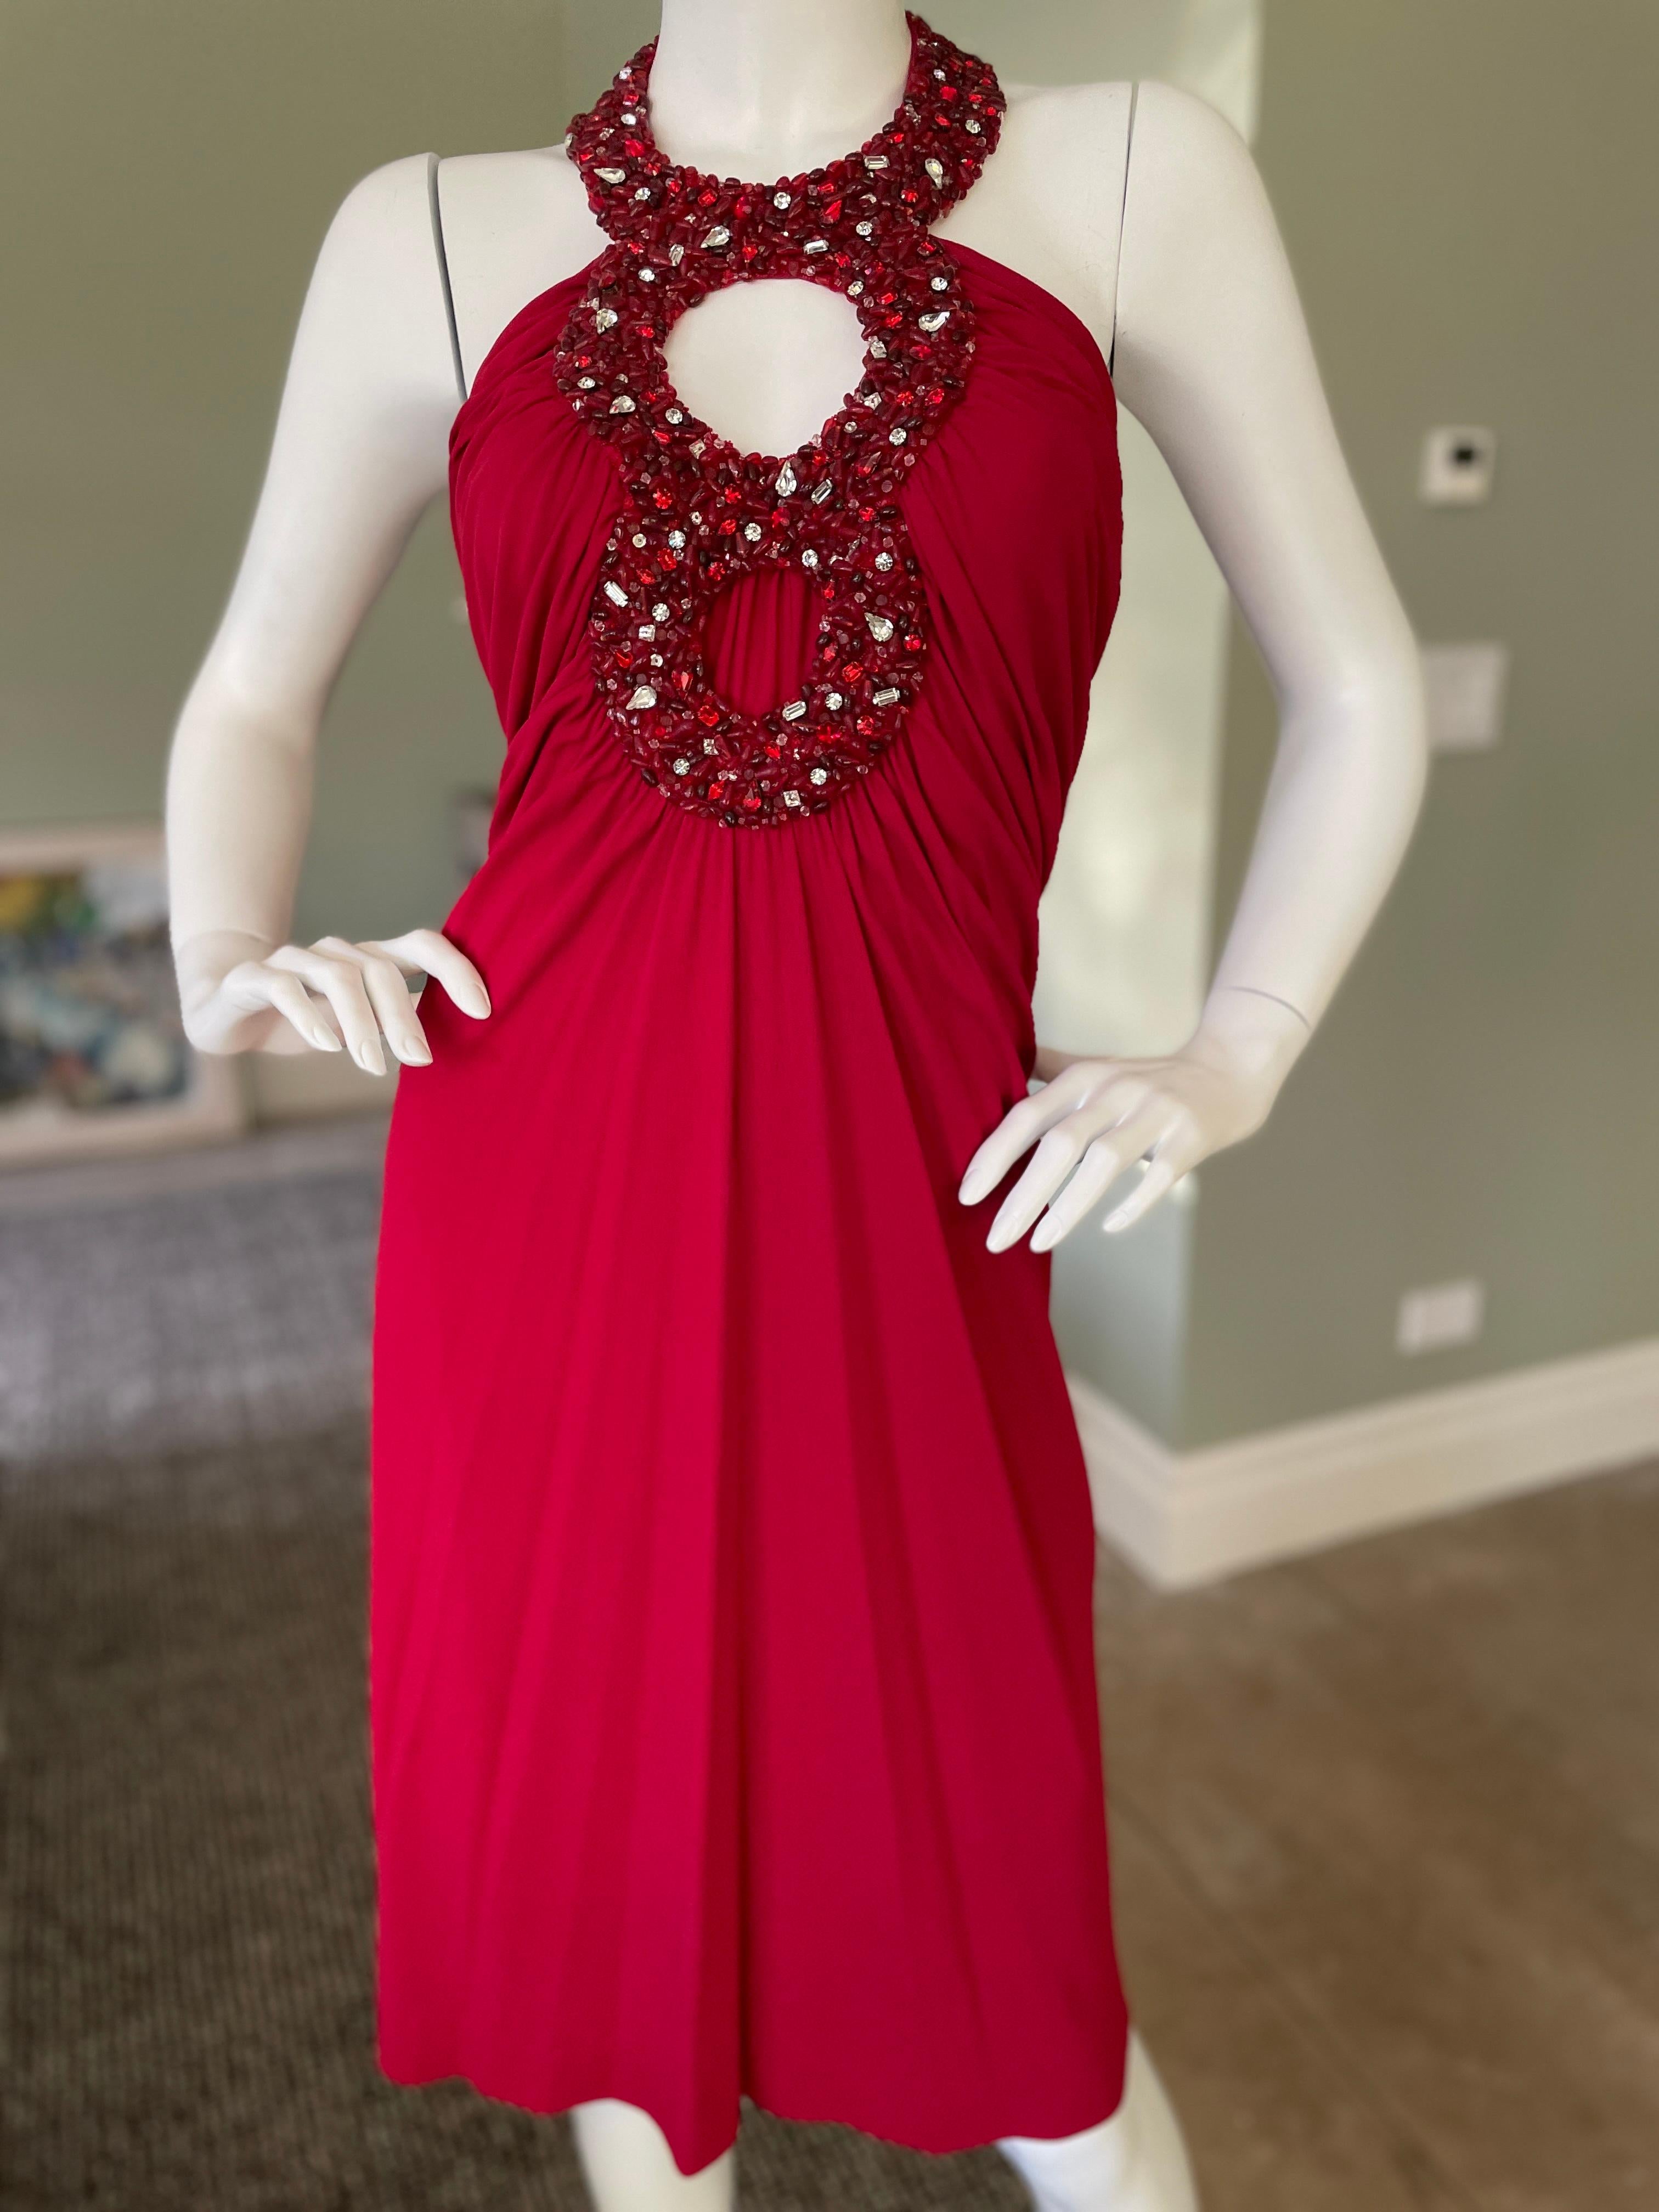 Azzaro Vintage Red Cocktail Dress with Jeweled Keyhole.
One of the keyholes is covered, but the panel could be removed to reveal skin if preferred.
Size 42
 Bust 34